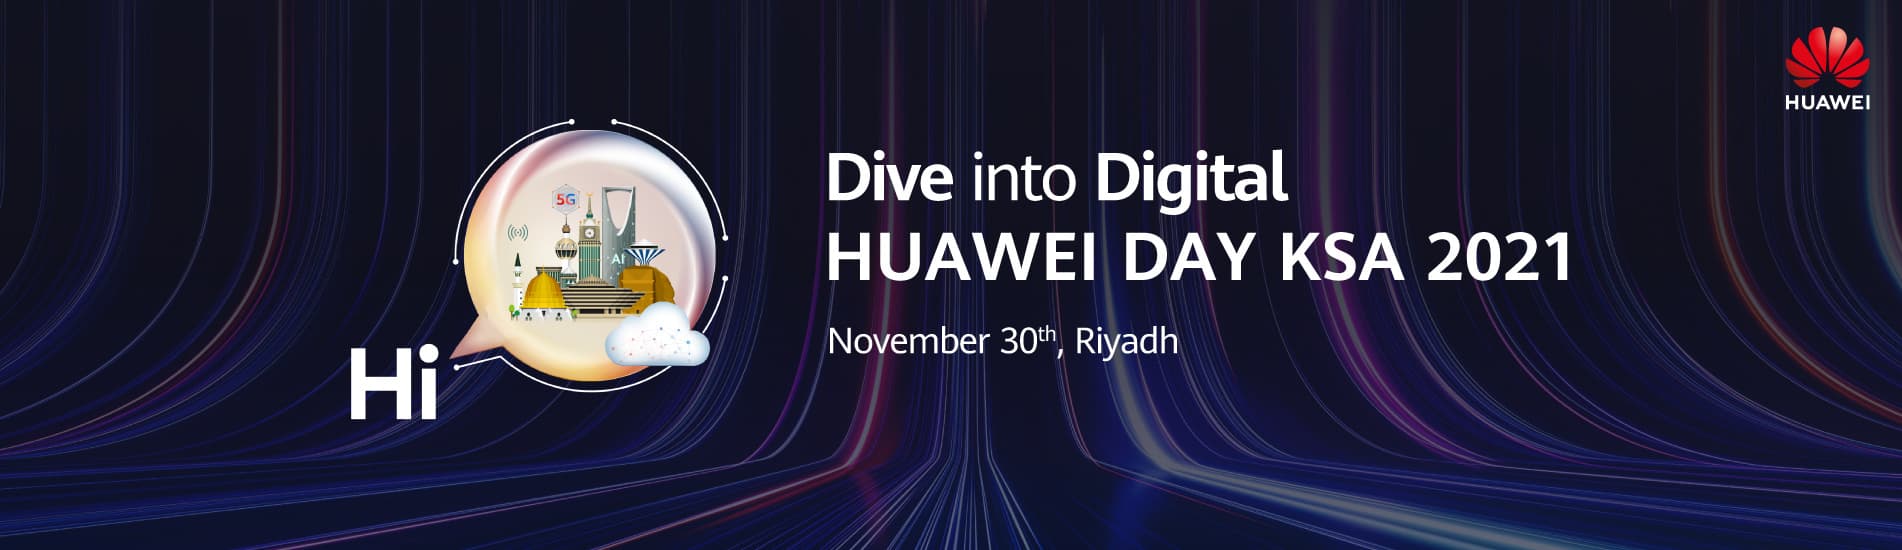 huawei-day-online